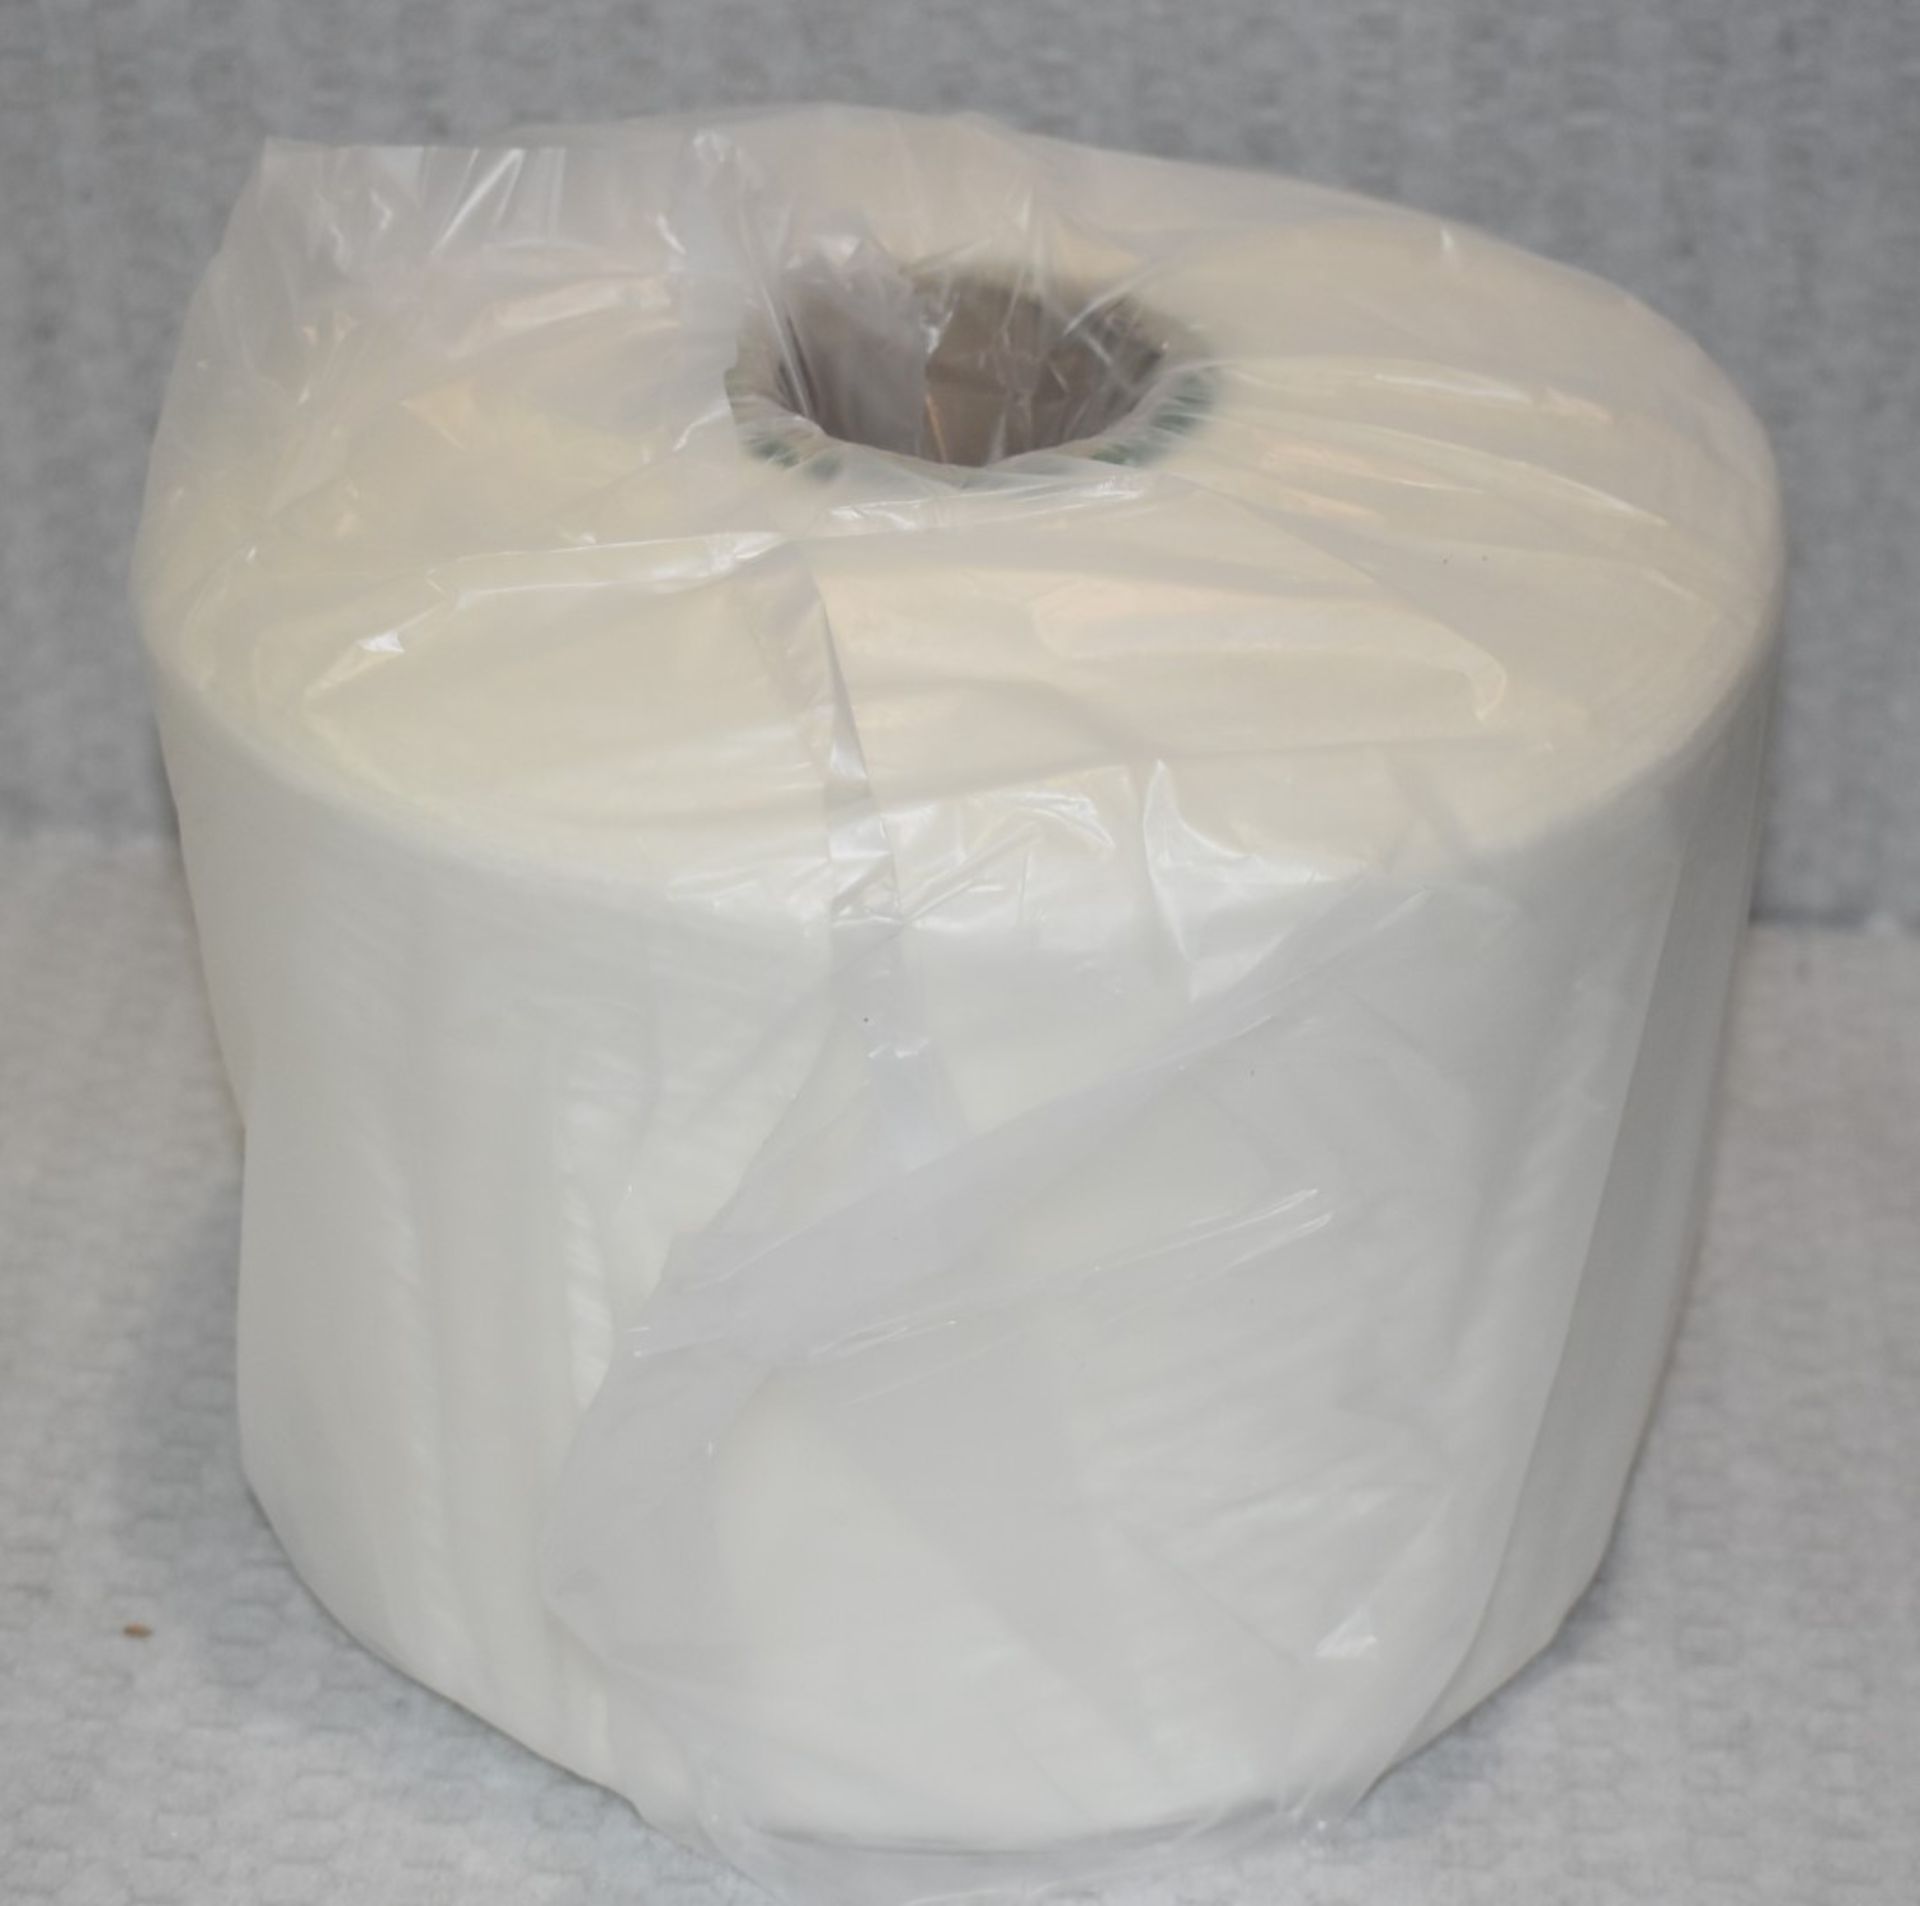 6 x Cones of 28/2 H.B 100% Acrylic Knitting Yarn - Colour: Ivory - Approx Weight: 1,300g - New Stock - Image 4 of 10